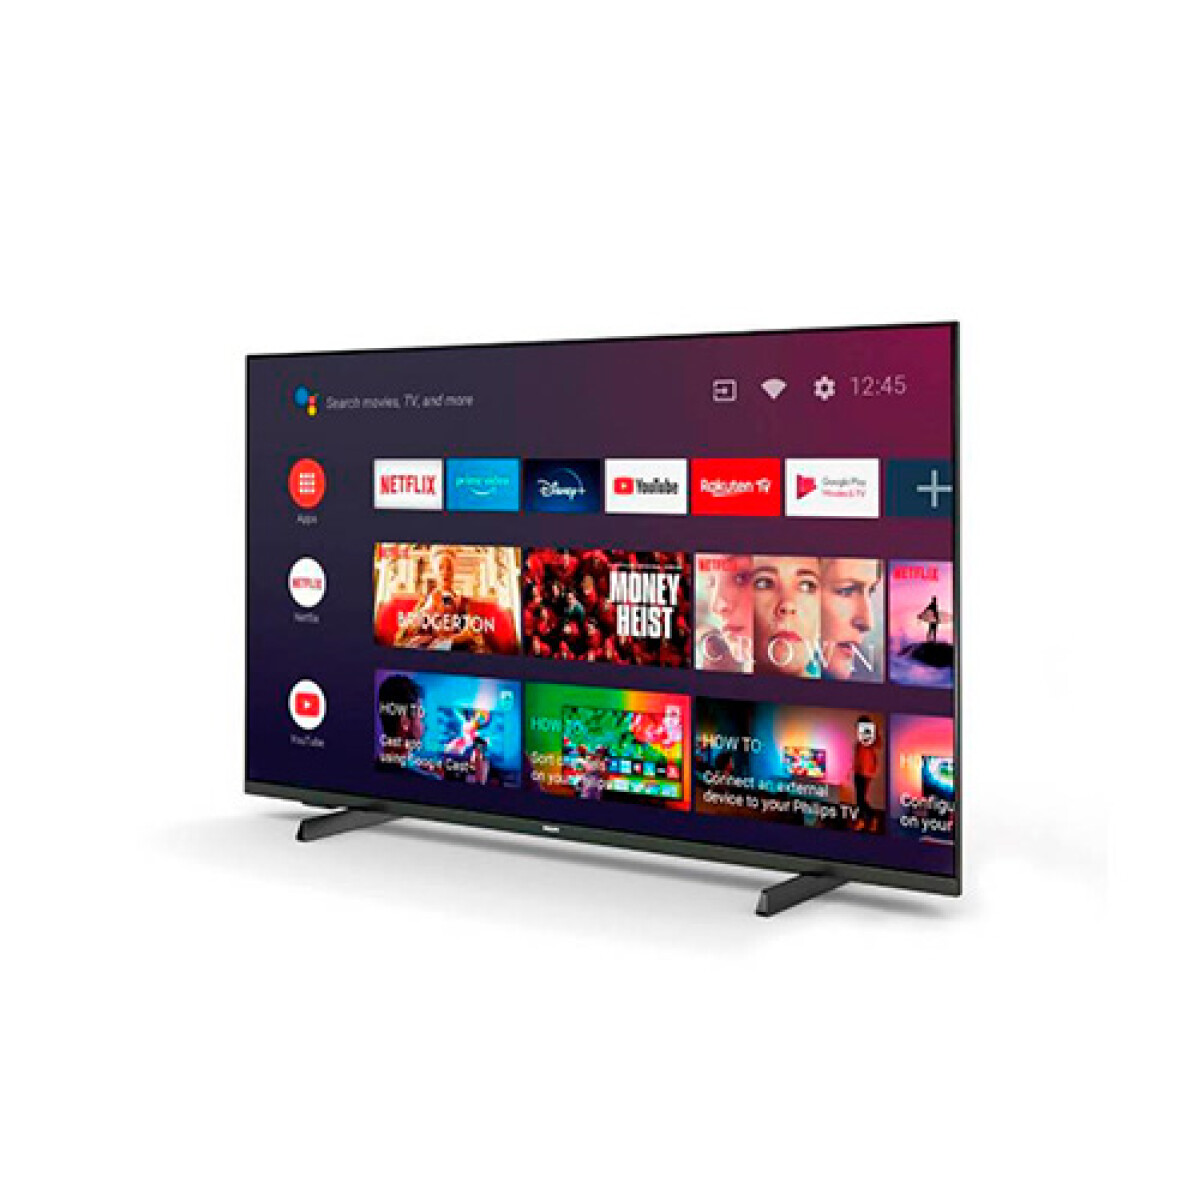 Smart Tv Philips 43 43PFD6947/55 Fhd Android - 001 